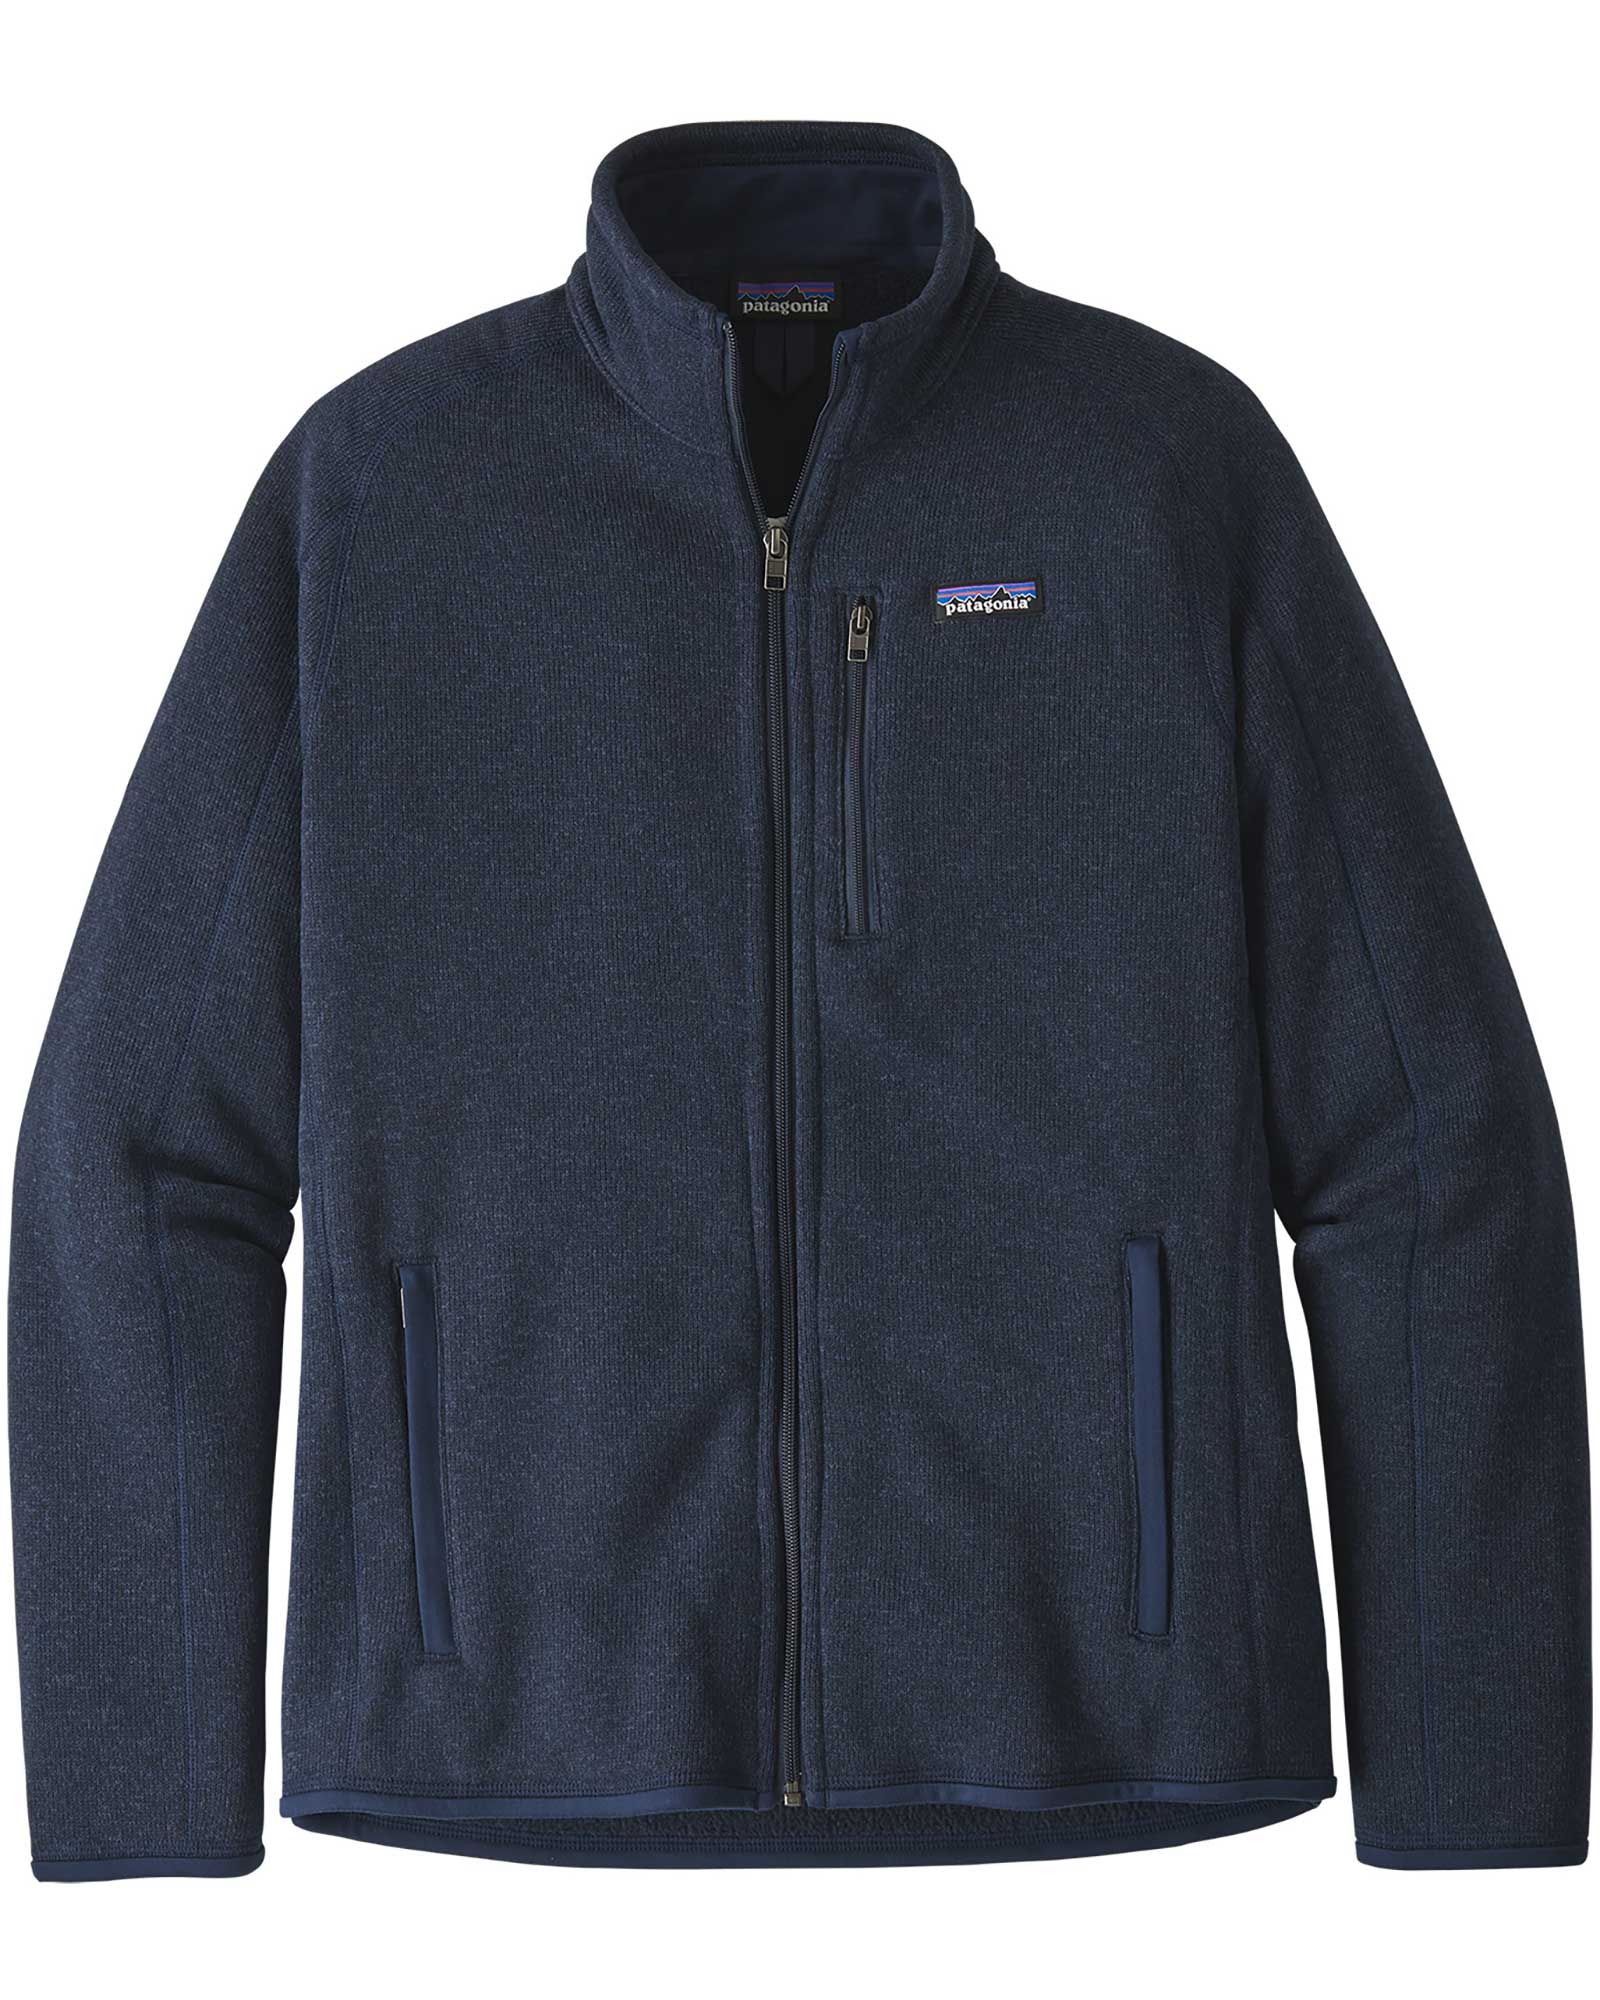 Patagonia Better Sweater Men’s Jacket - New Navy L